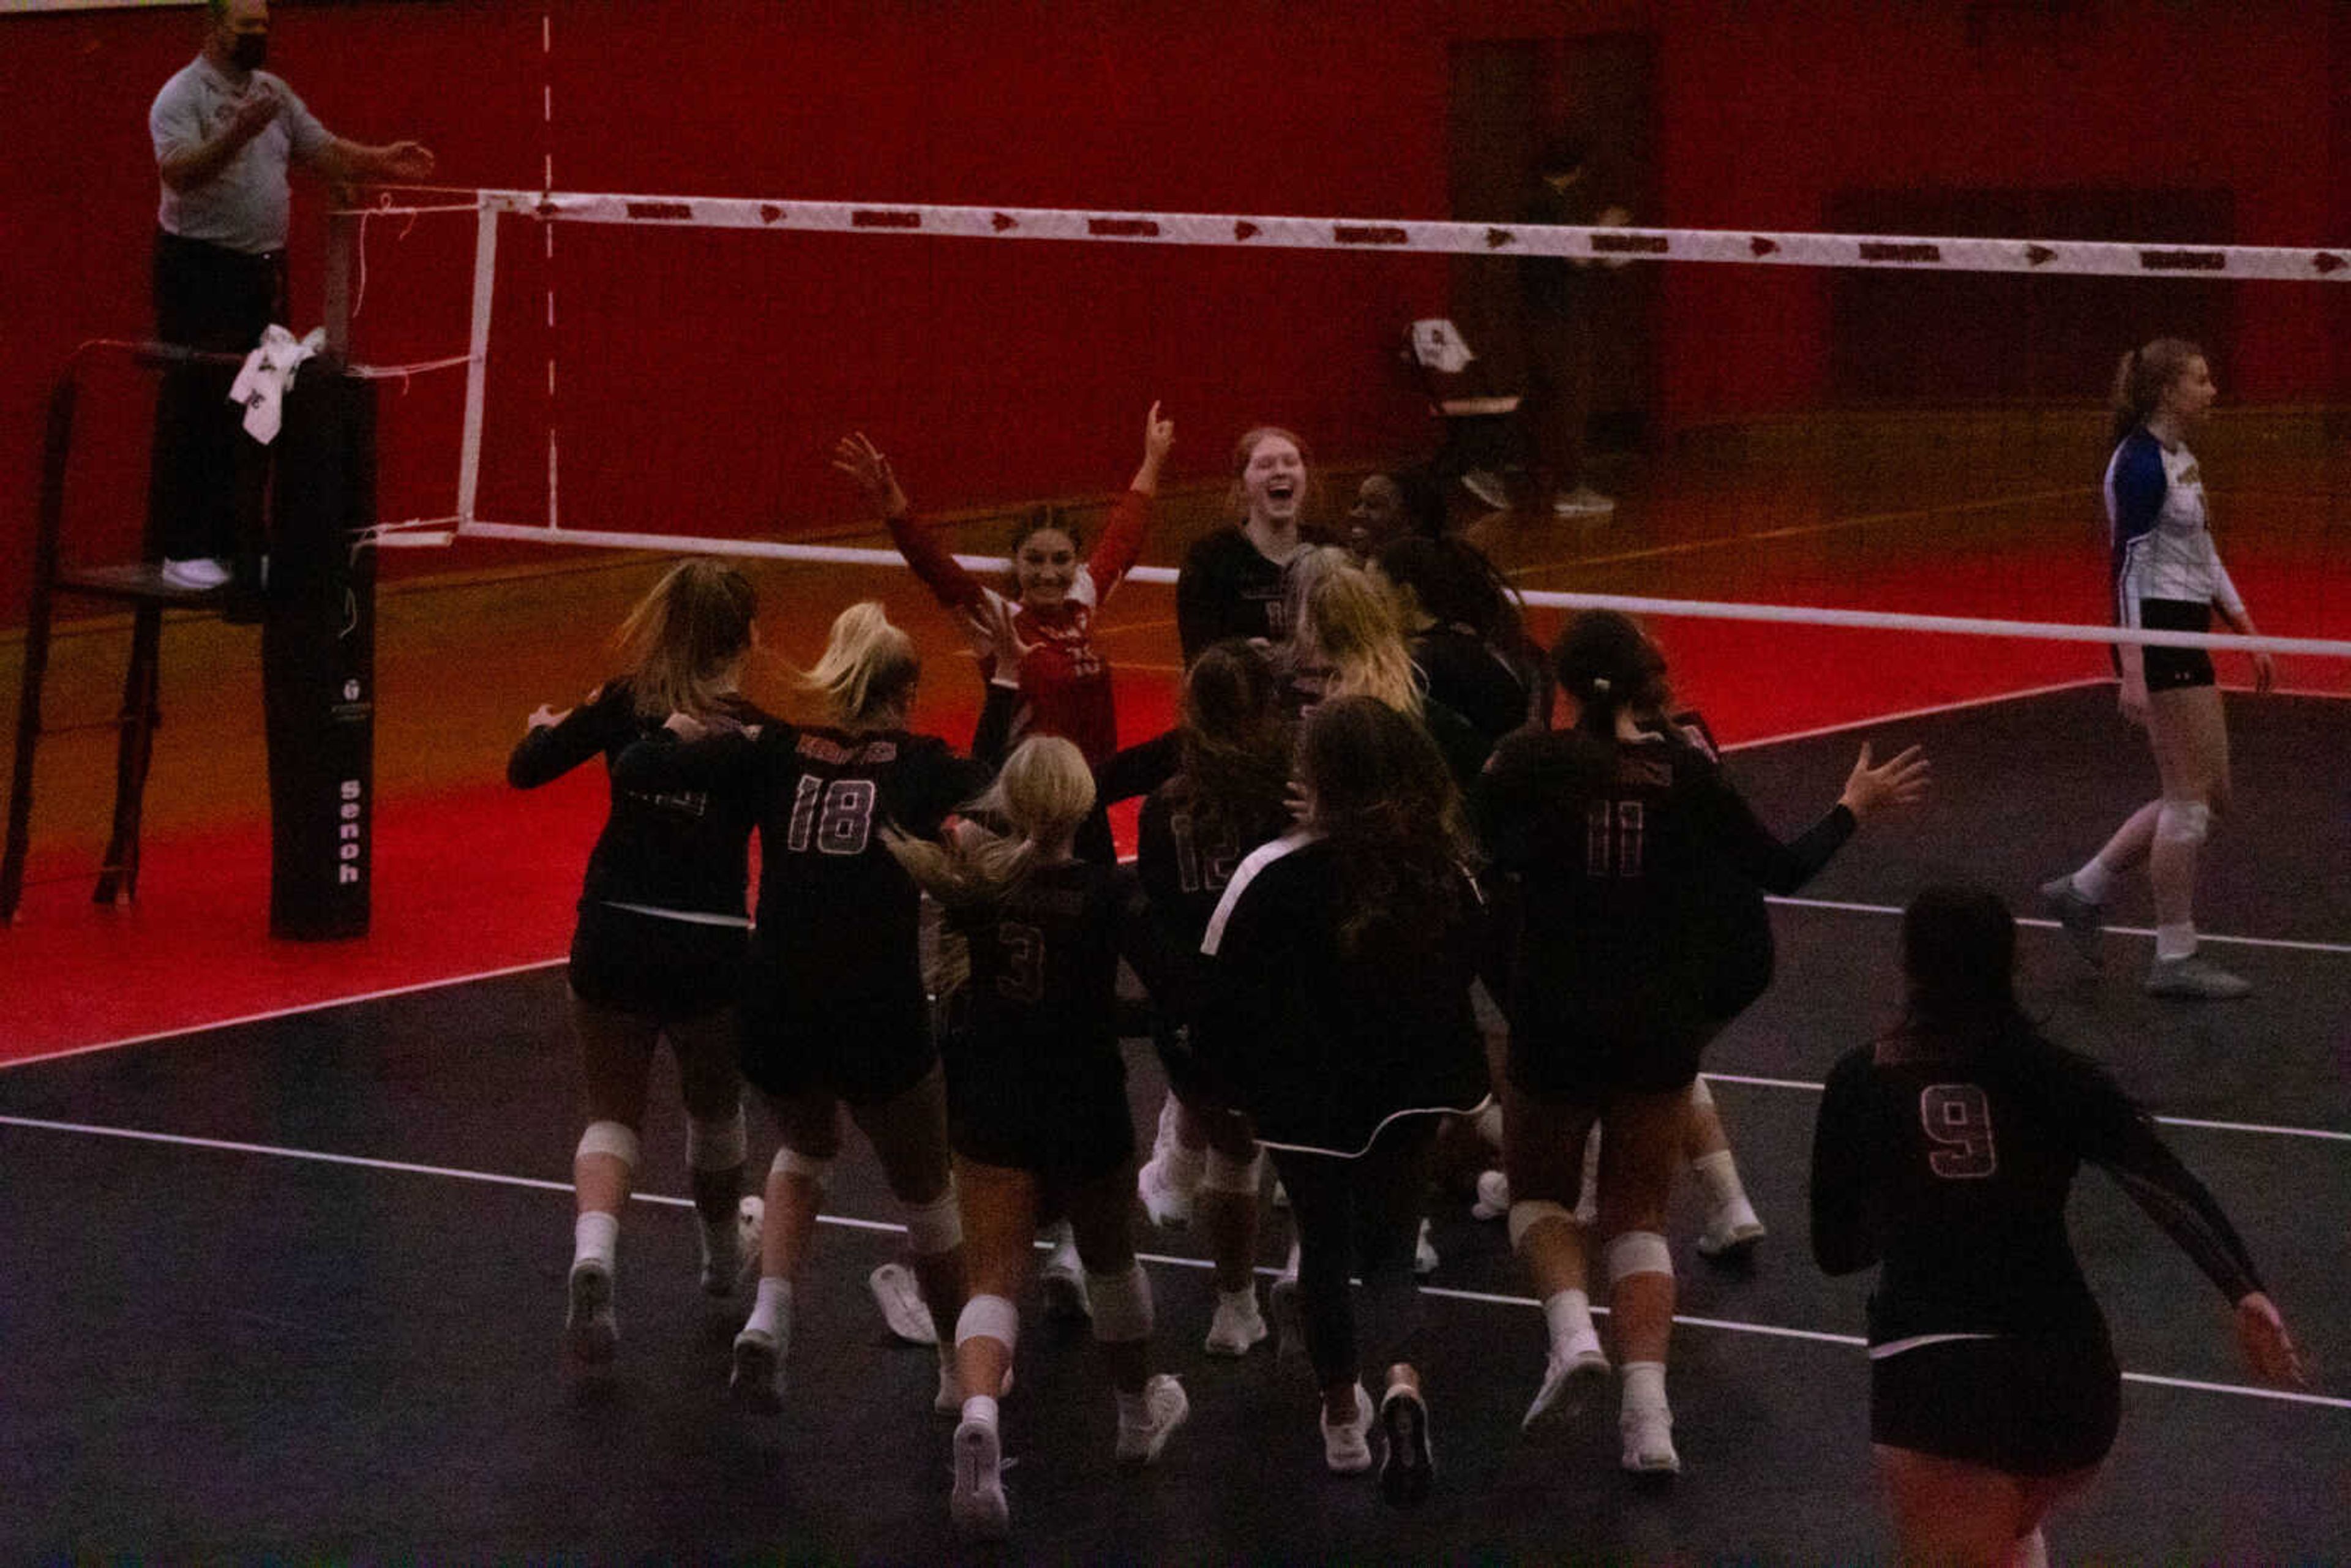 SEMO volleyball celebrates sweep against Morehead State on Nov. 13. The Redhawks defeated the Eagles 3-0, taking the OVC regular season title.